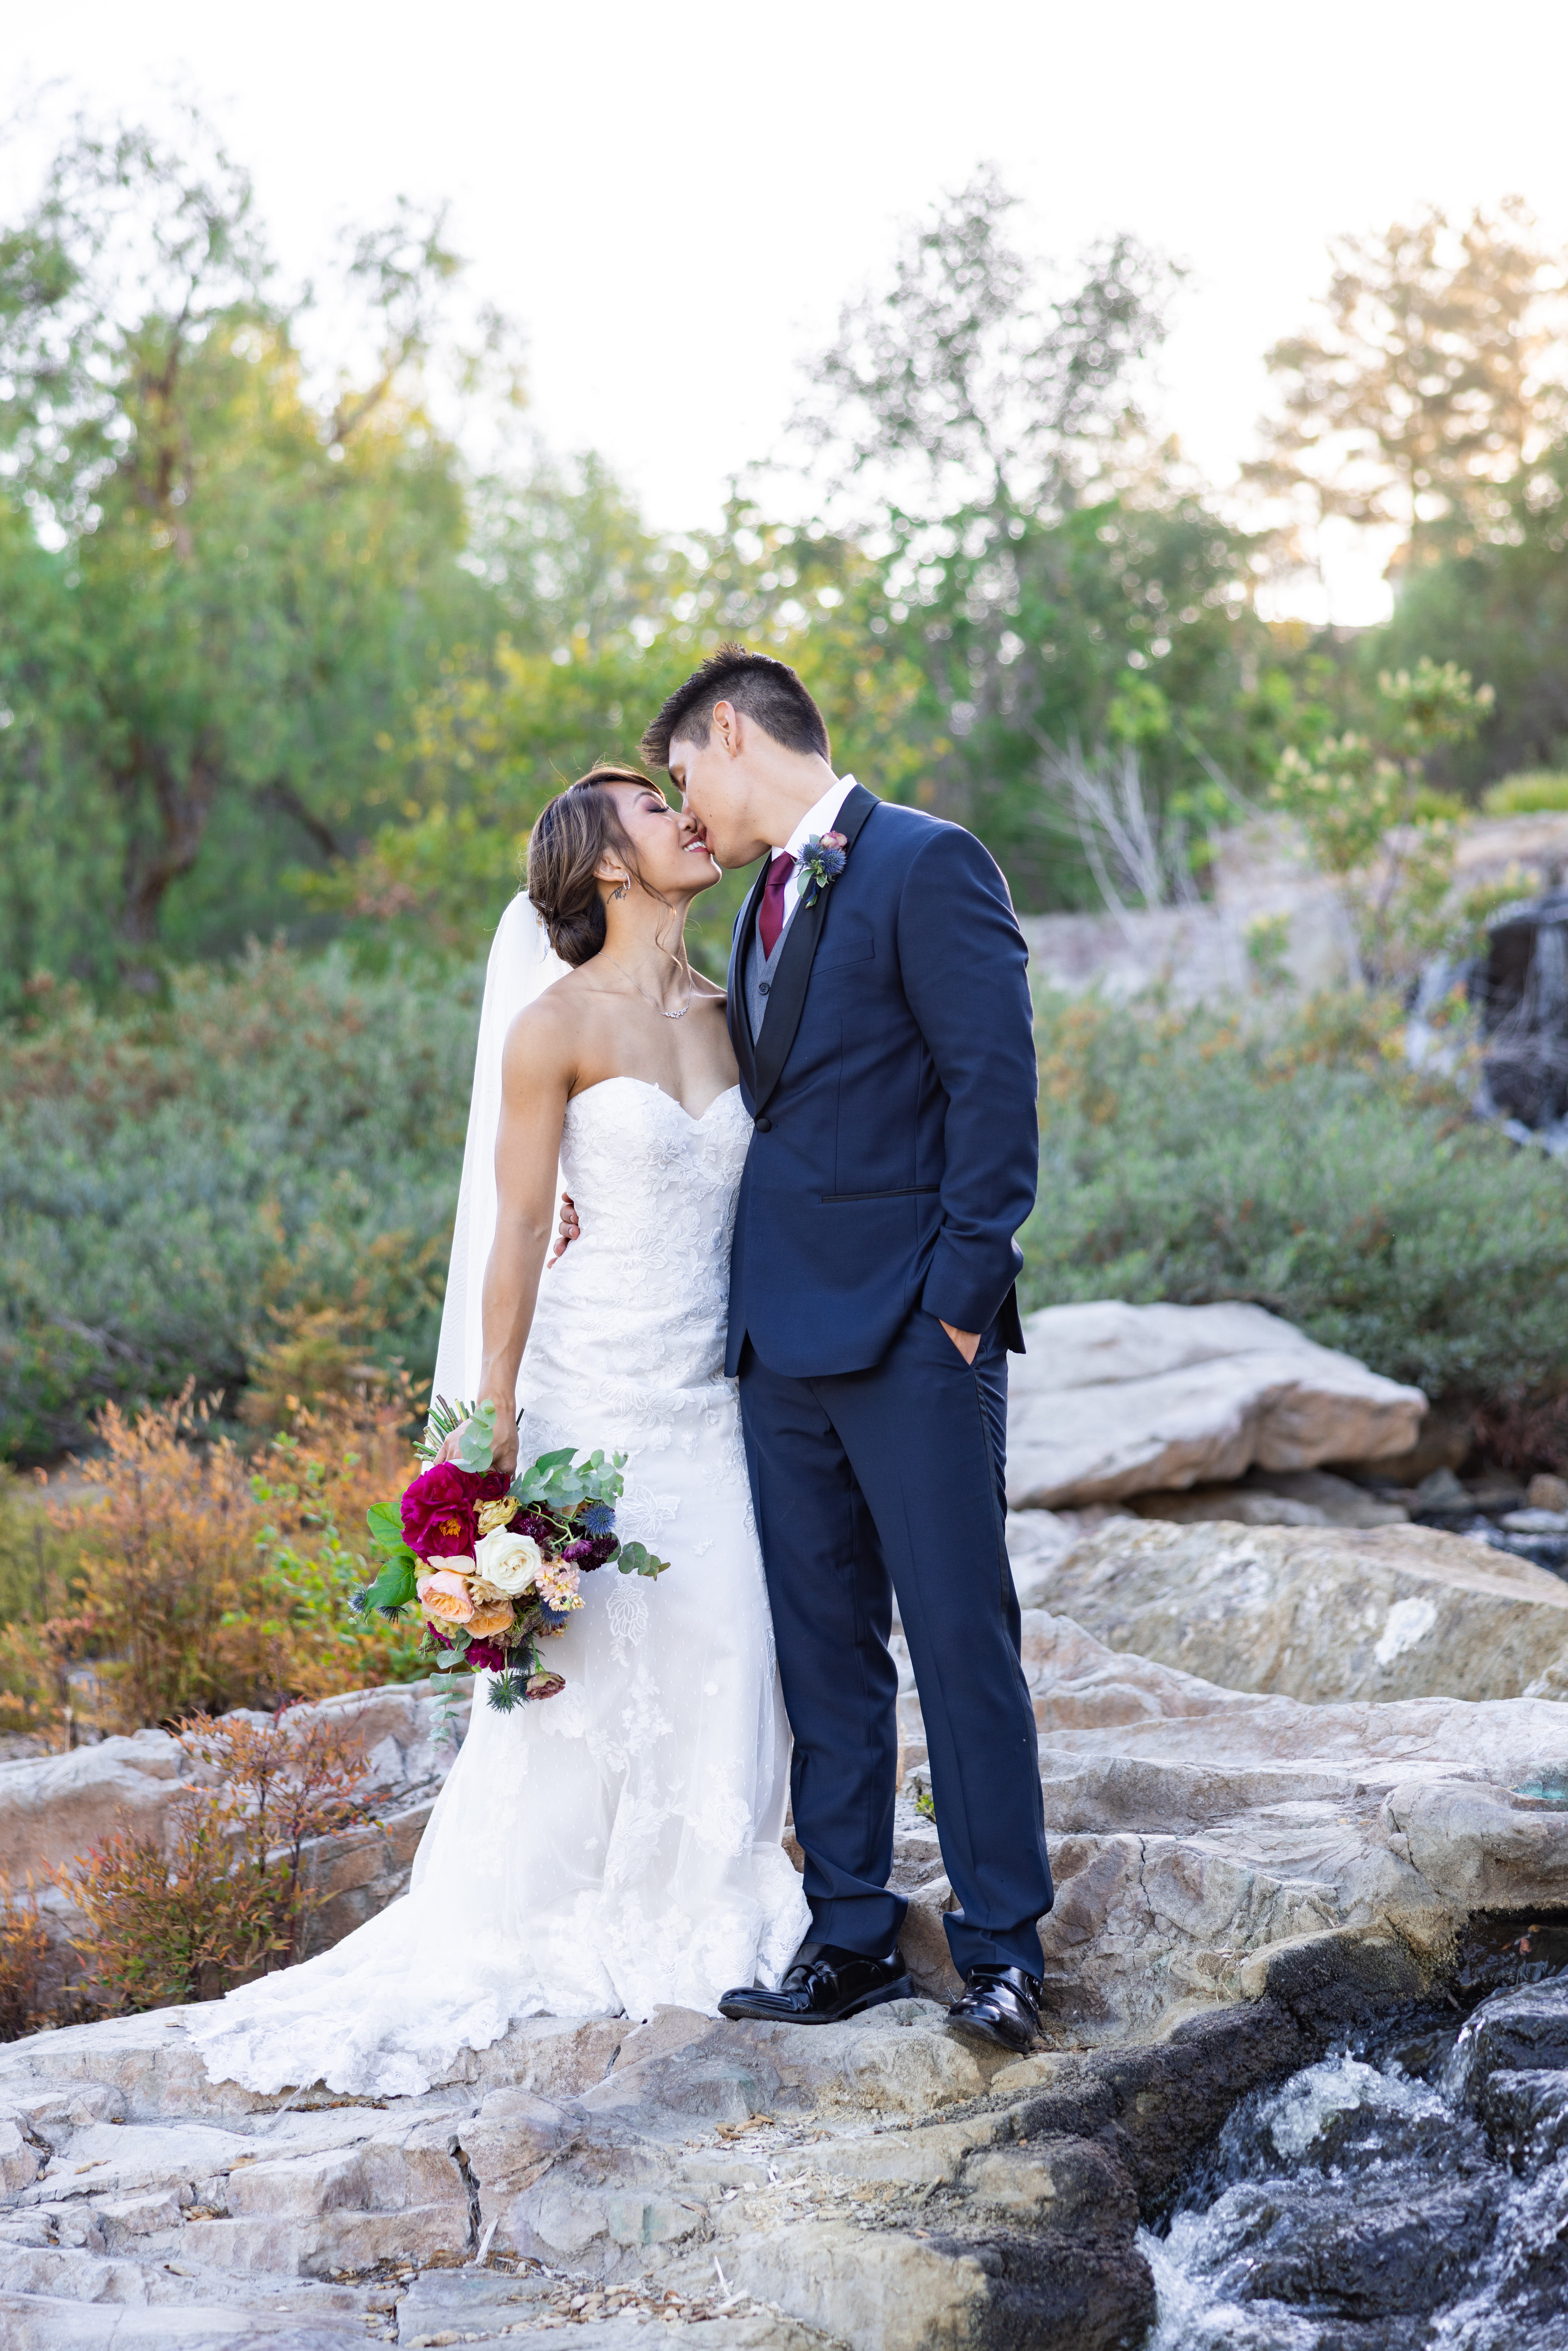 bride in strapless lace wedding dress and groom in navy tuxedo take outdoor sunset portrait photos by waterfall at Dove Canyon Golf Club